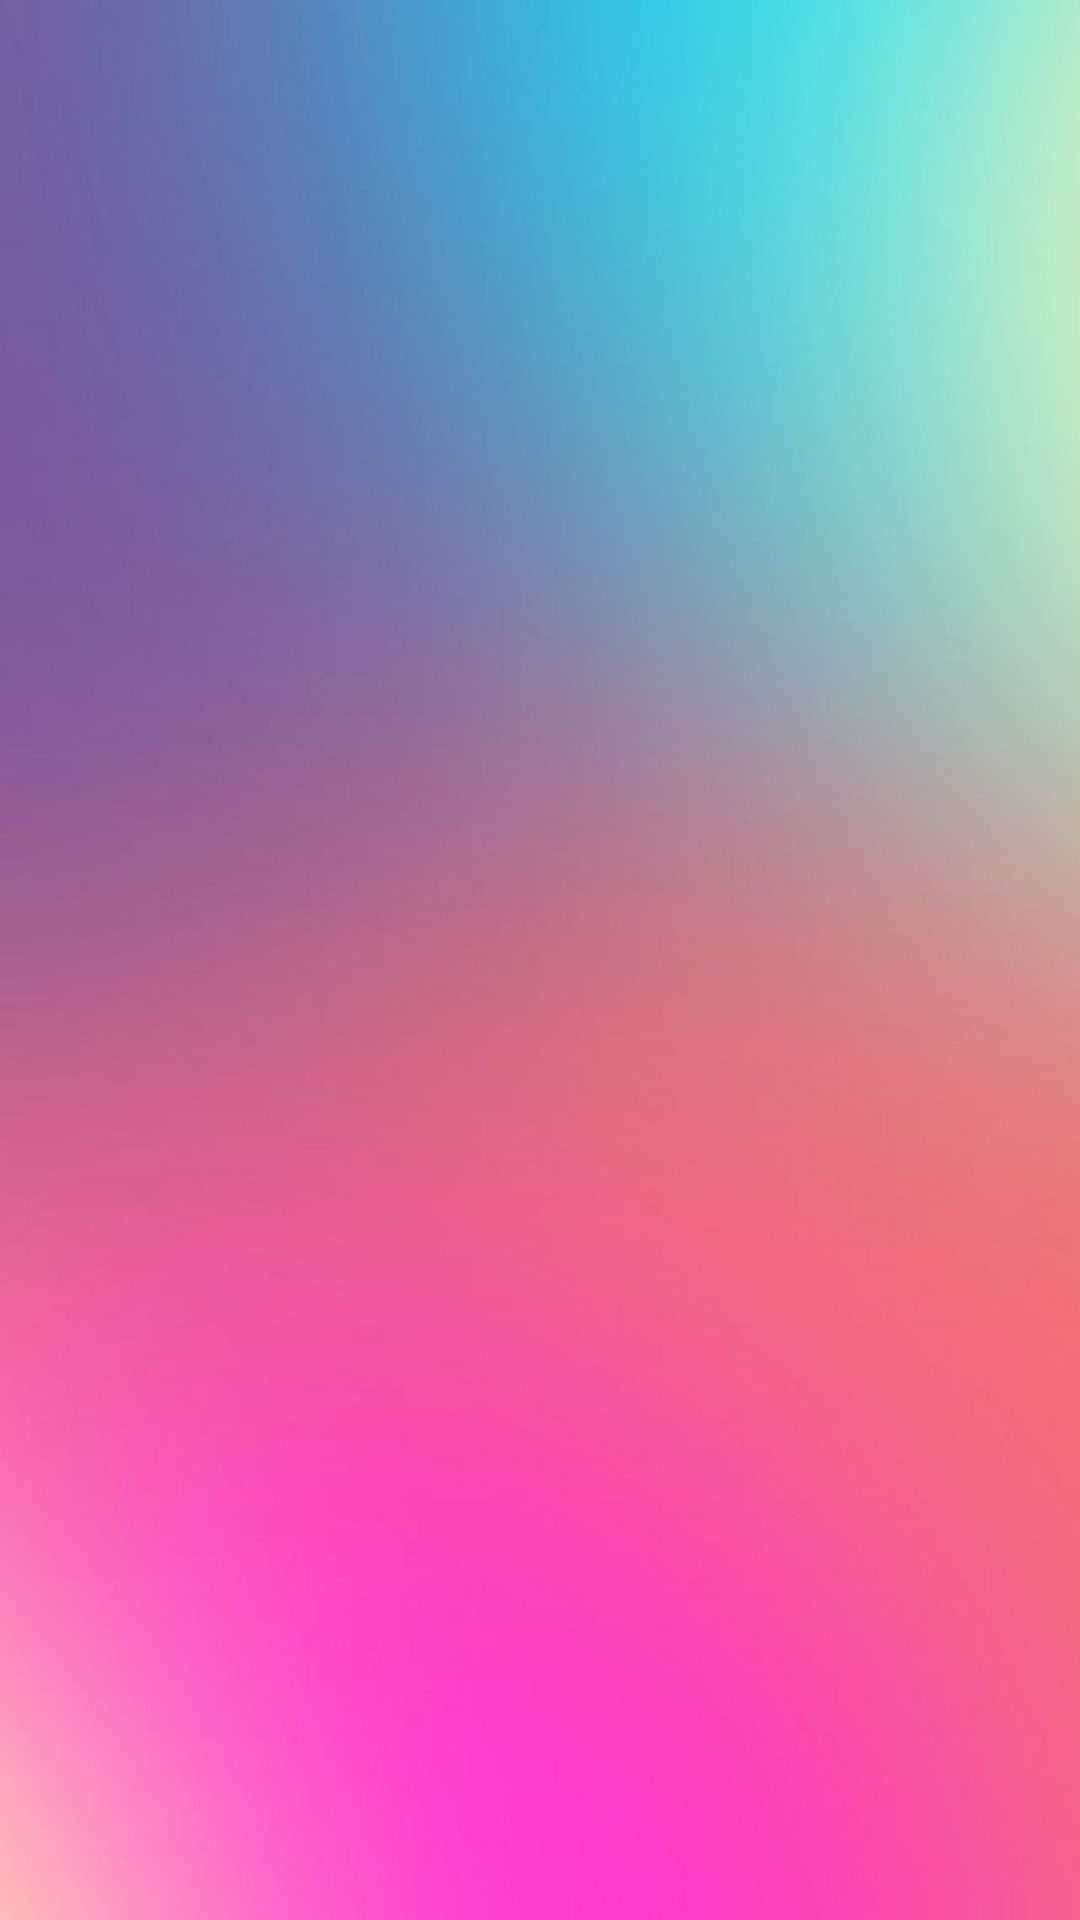 Gradient Iphone Wallpaper Design With High-resolution - Iphone Wallpaper Design , HD Wallpaper & Backgrounds